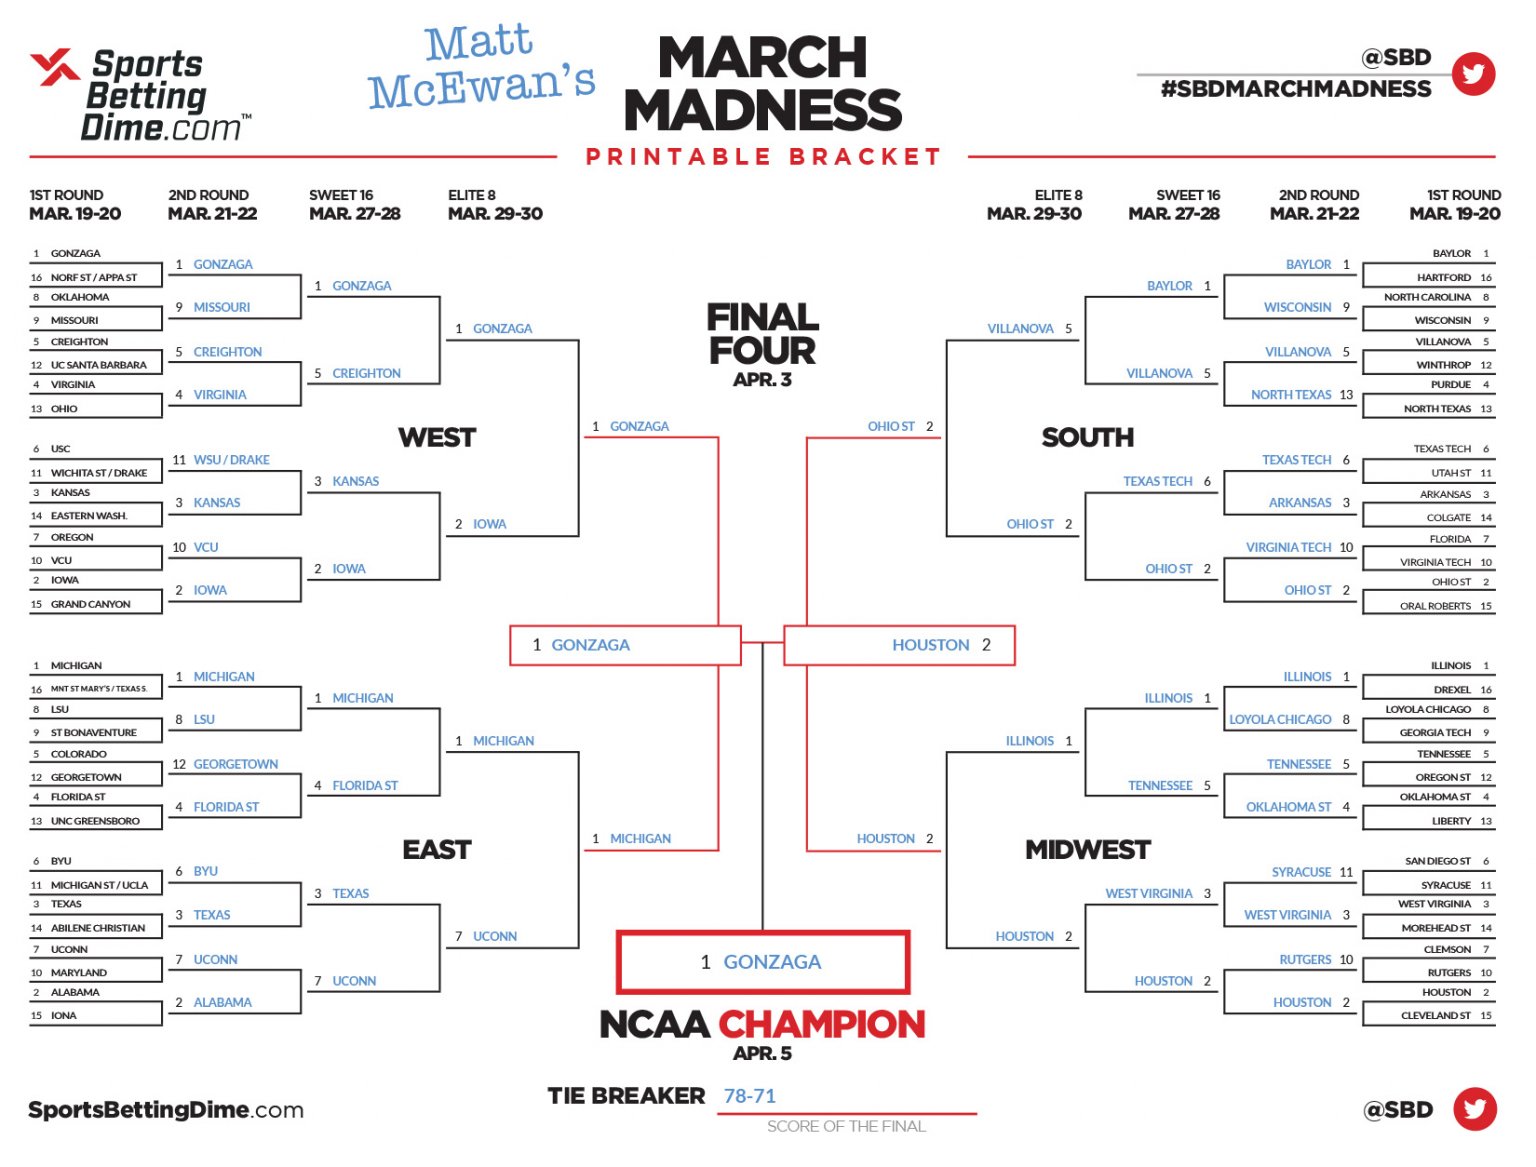 SBD's Expert Brackets and March Madness Picks